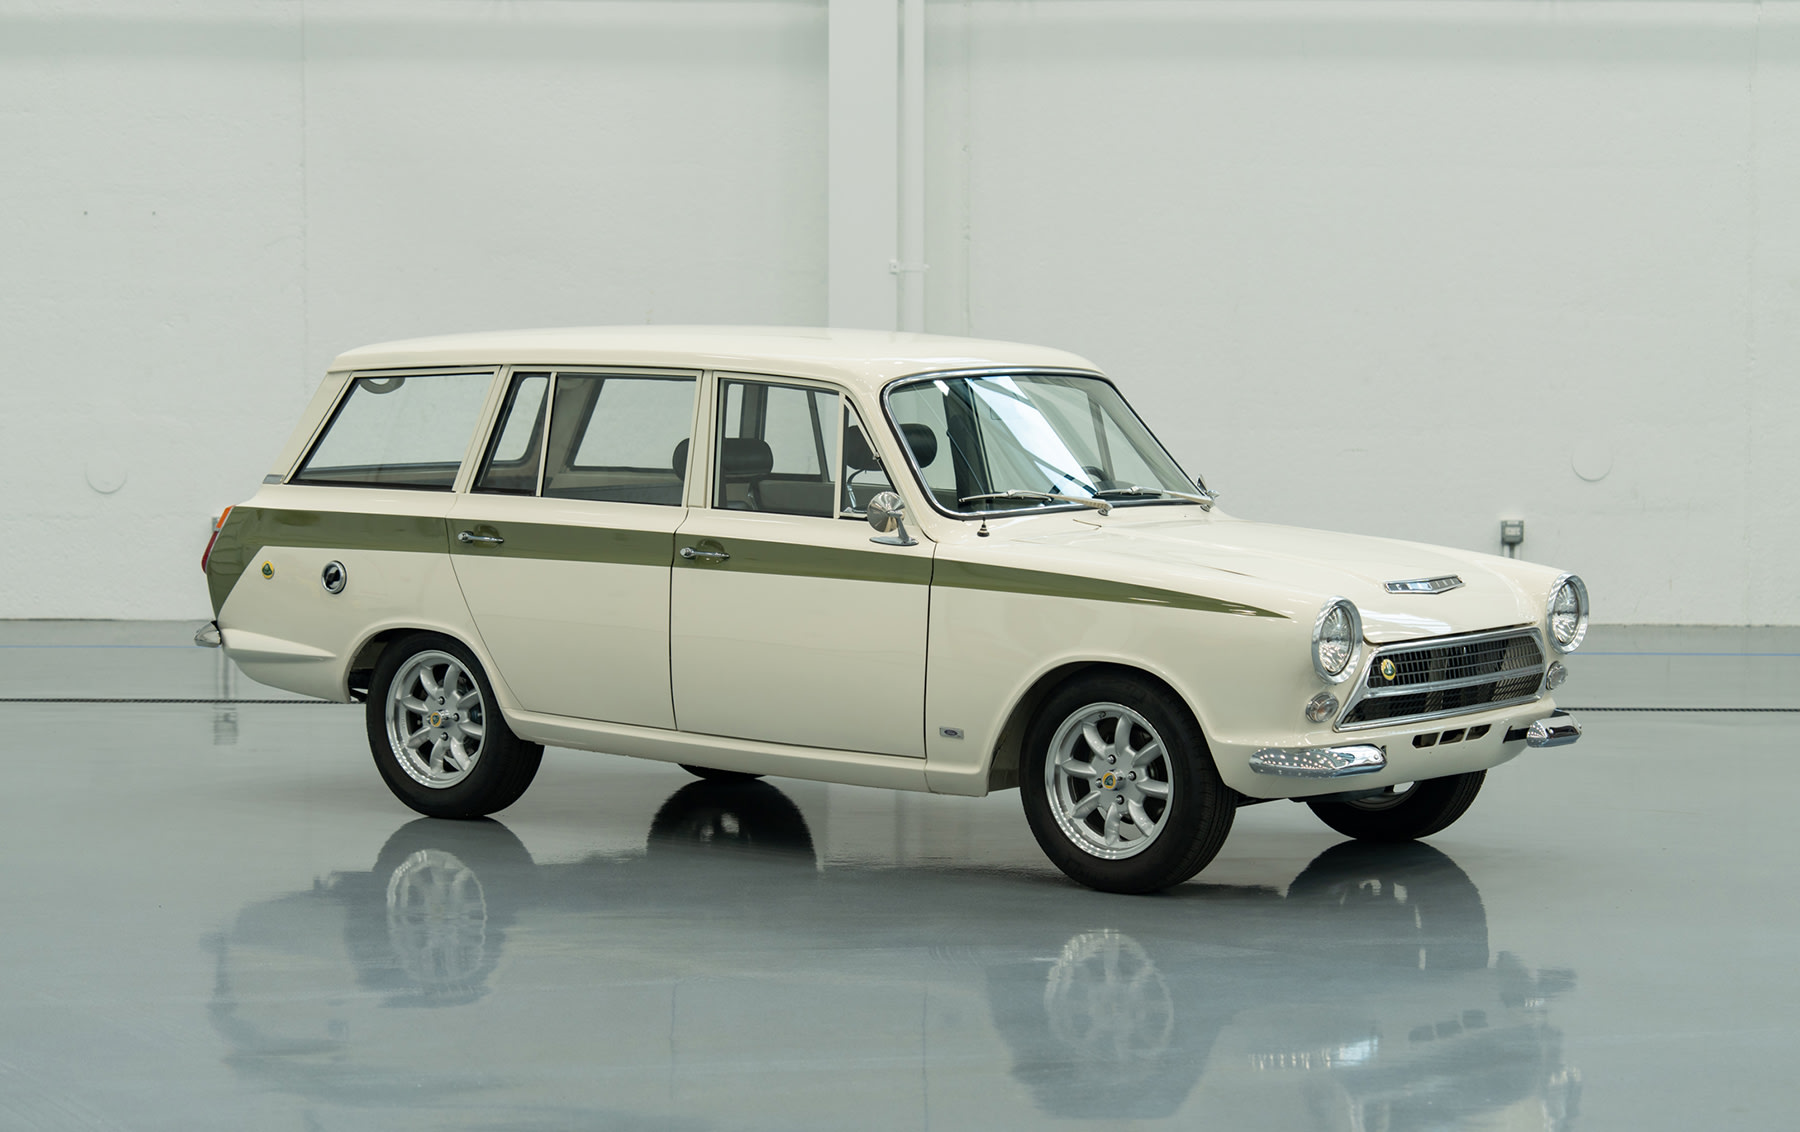 Another chance to own the world’s most practical Lotus Cortina